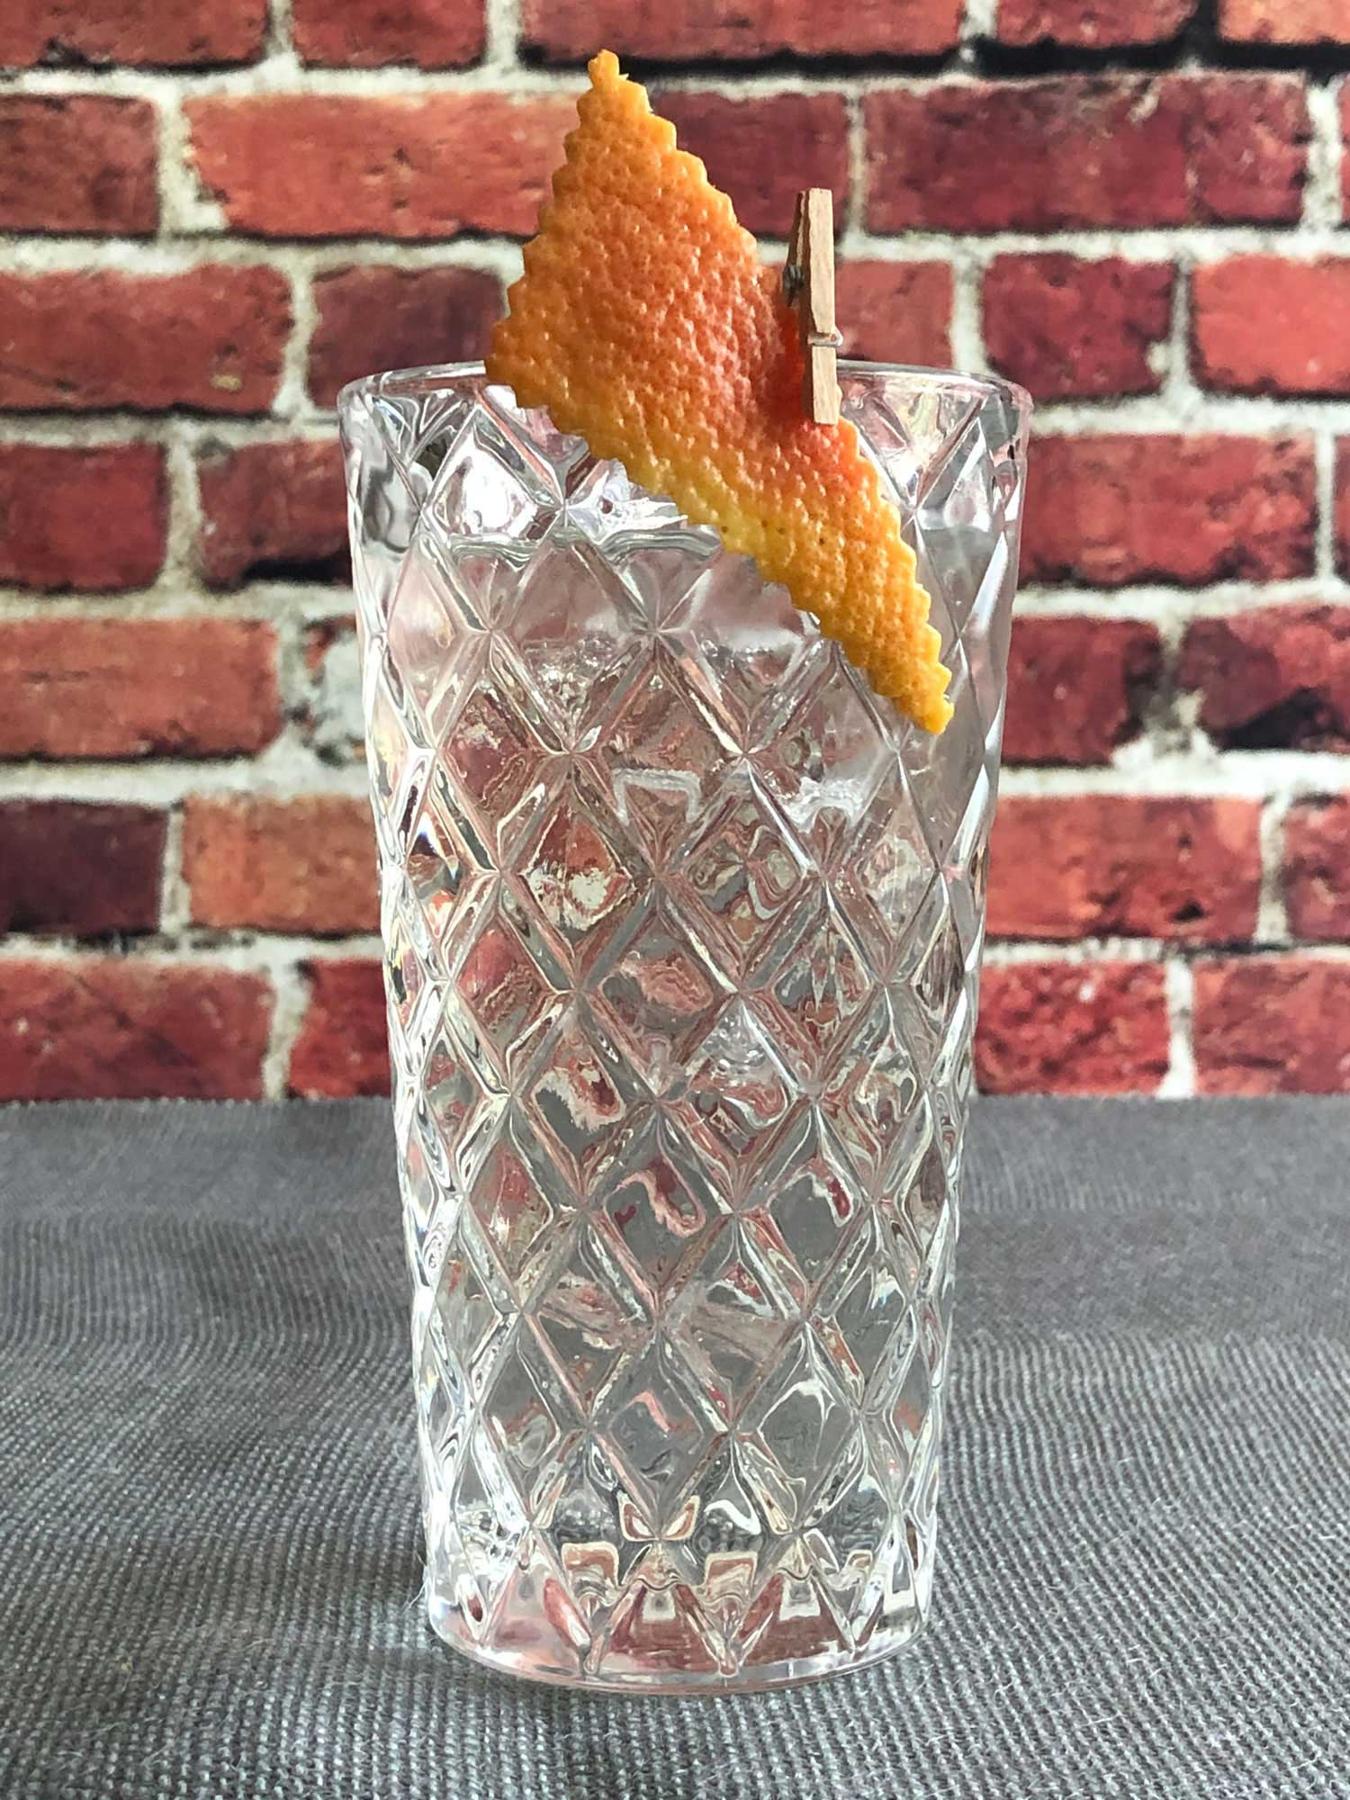 An example of the Clear and Present Highball, the mixed drink (drink) featuring soda water, Salers Gentian Apéritif, Dolin Blanc Vermouth de Chambéry, and grapefruit twist; photo by Lee Edwards